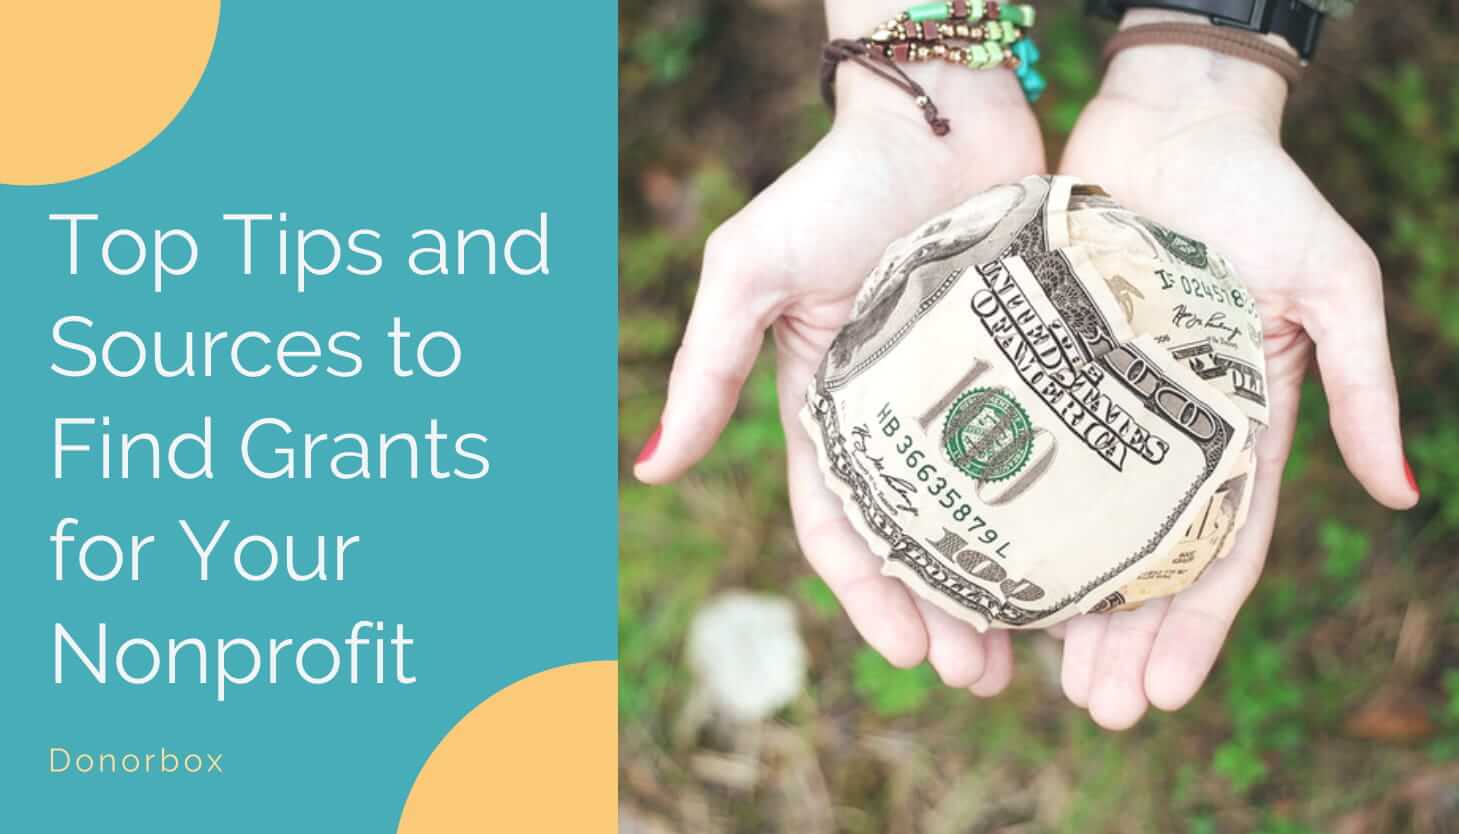 Top Tips and Sources to Find Grants for Your Nonprofit